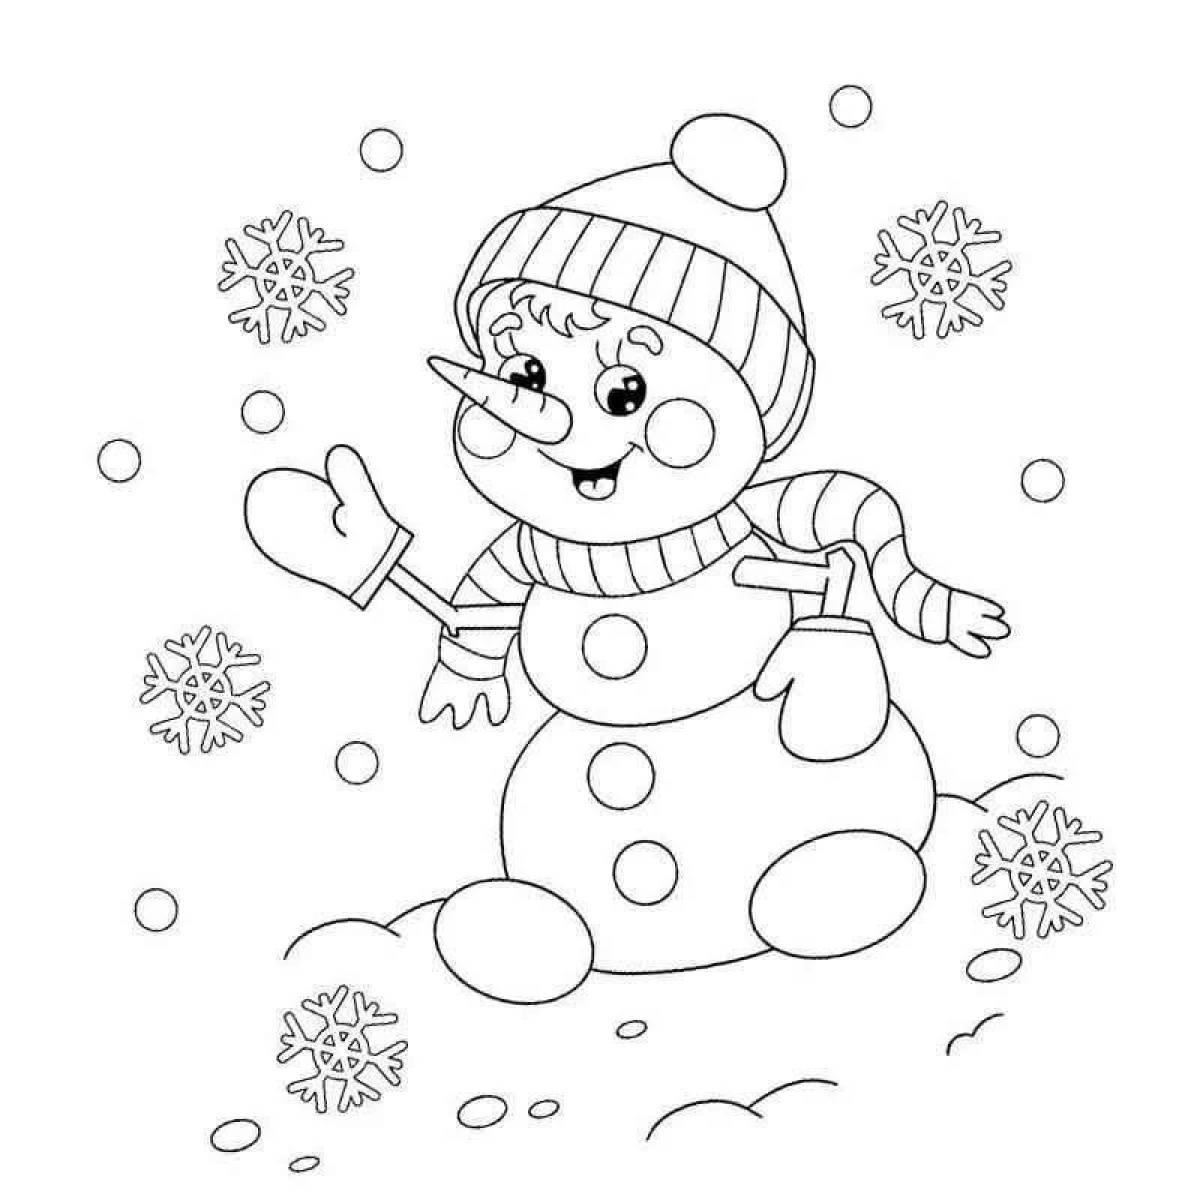 Fun coloring snowman for children 2-3 years old